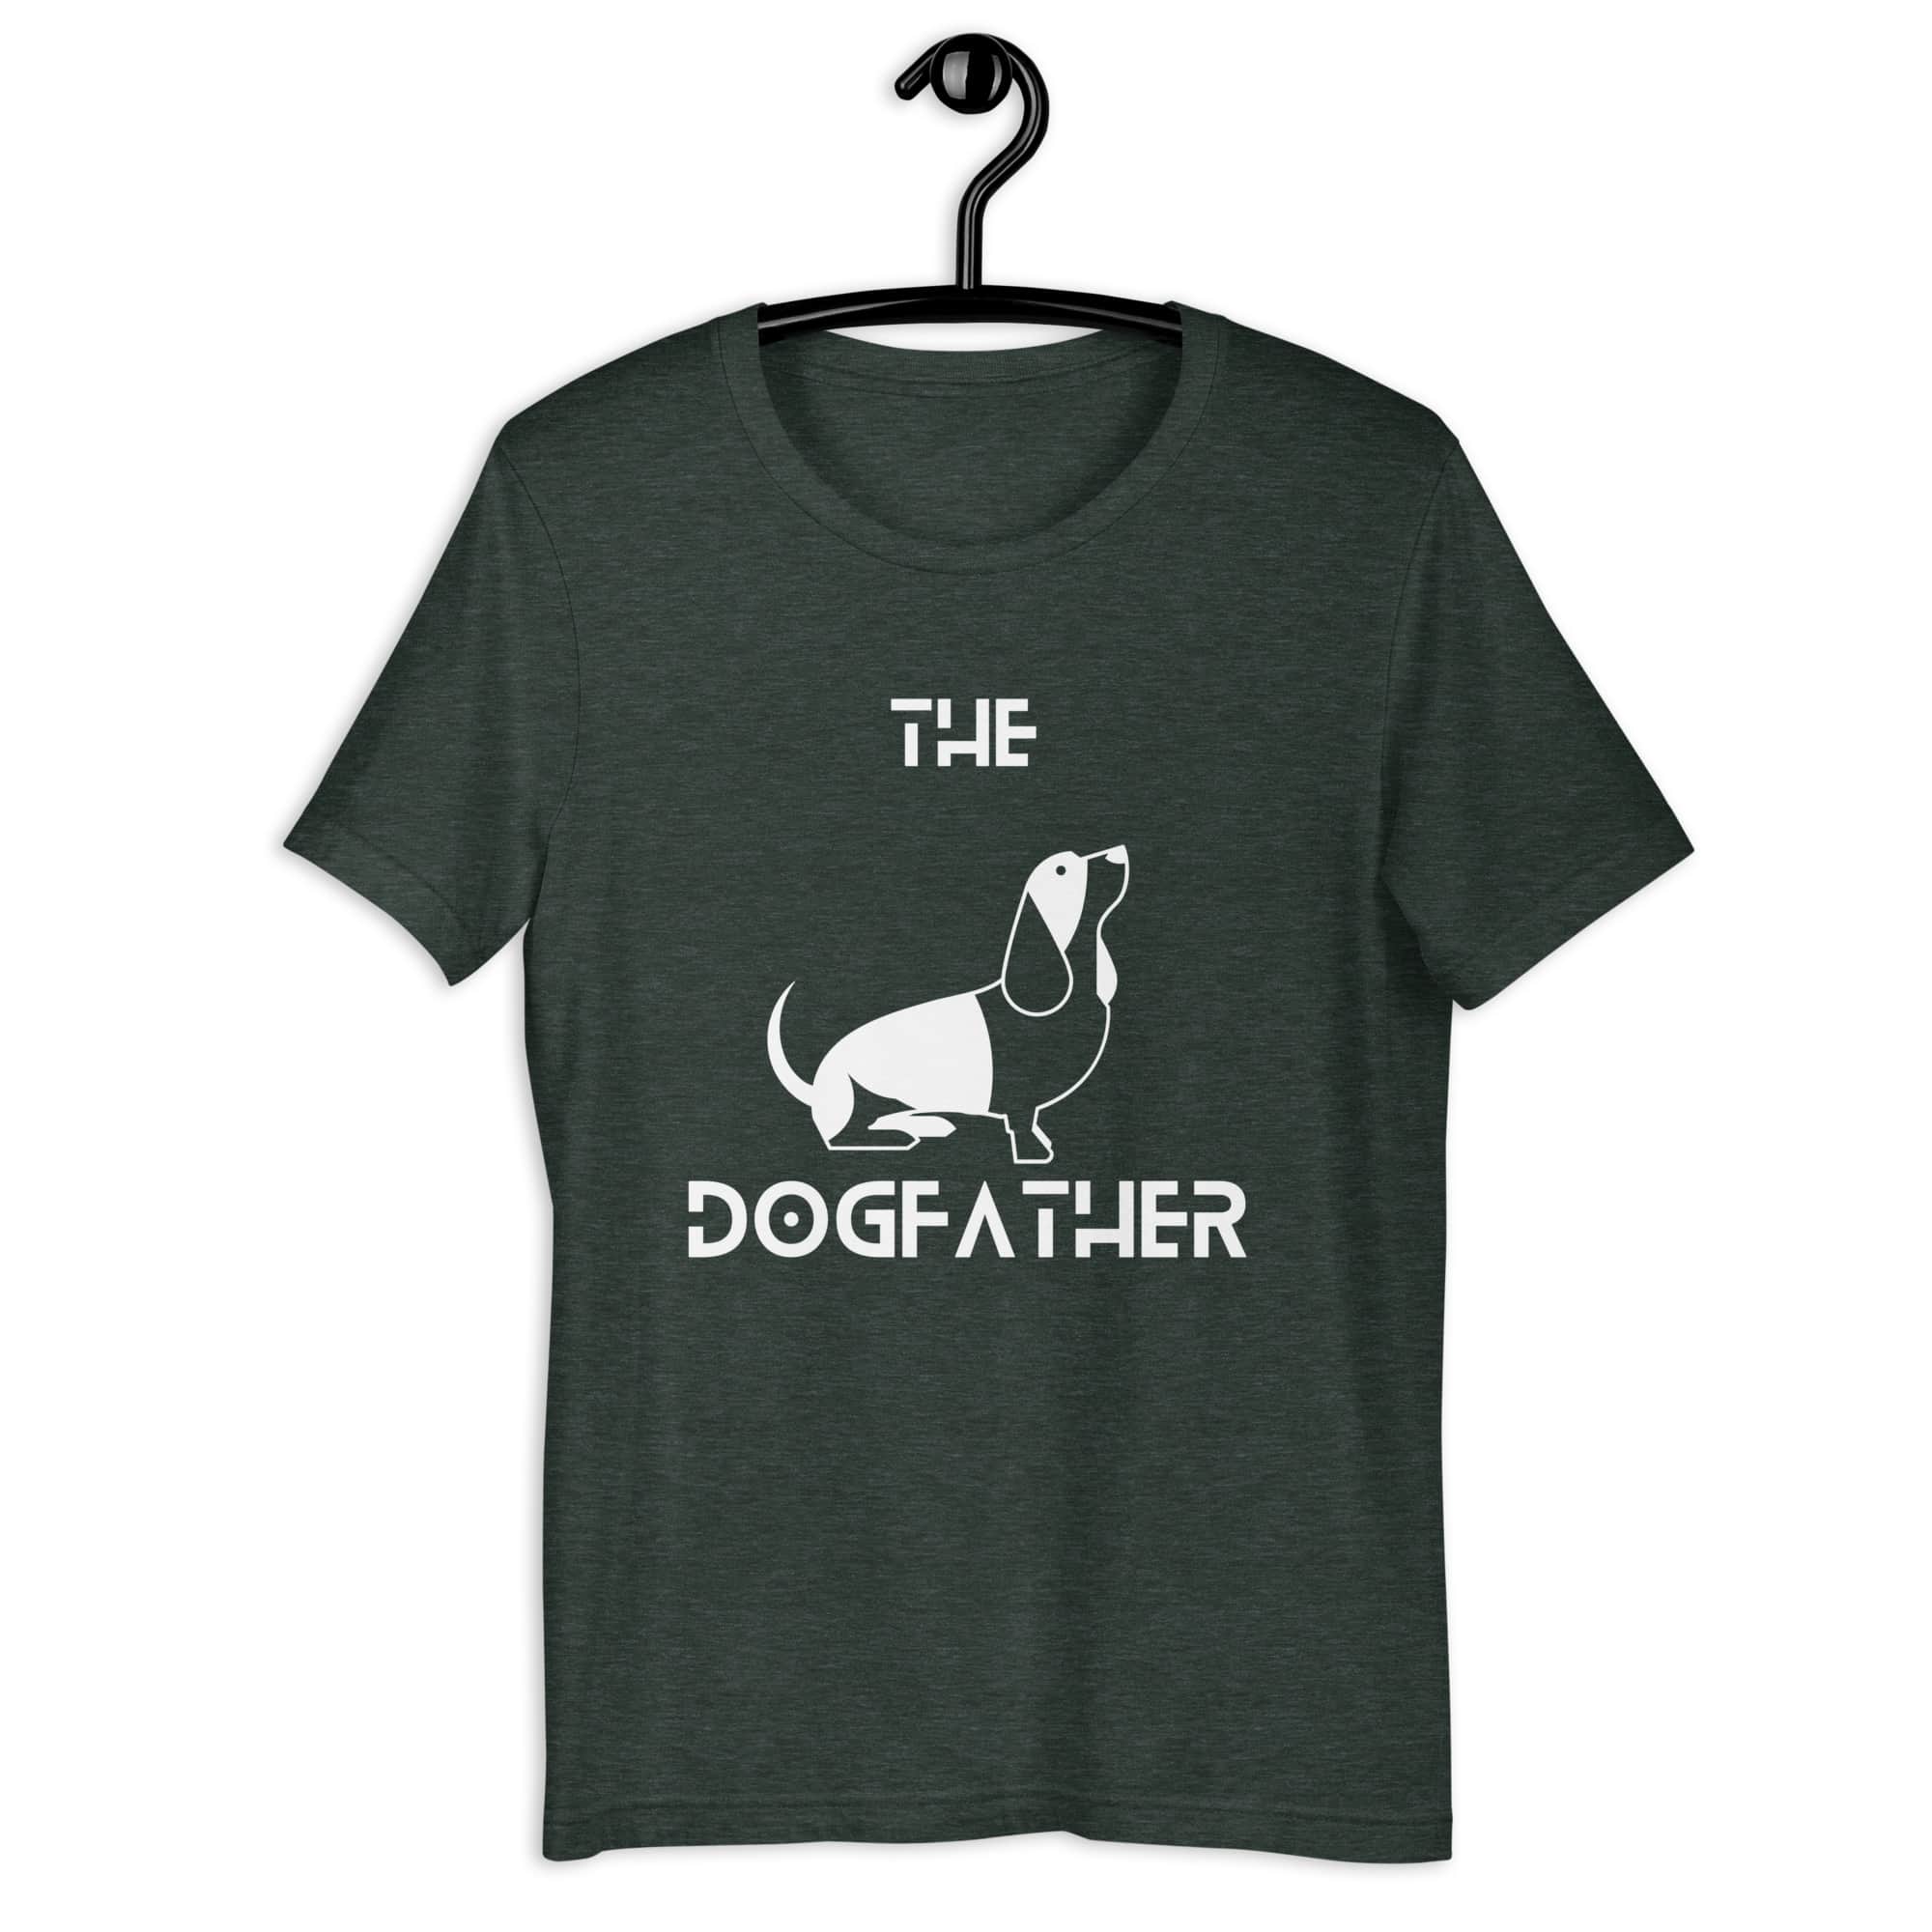 The Dogfather Hounds Unisex T-Shirt. Heather Forest